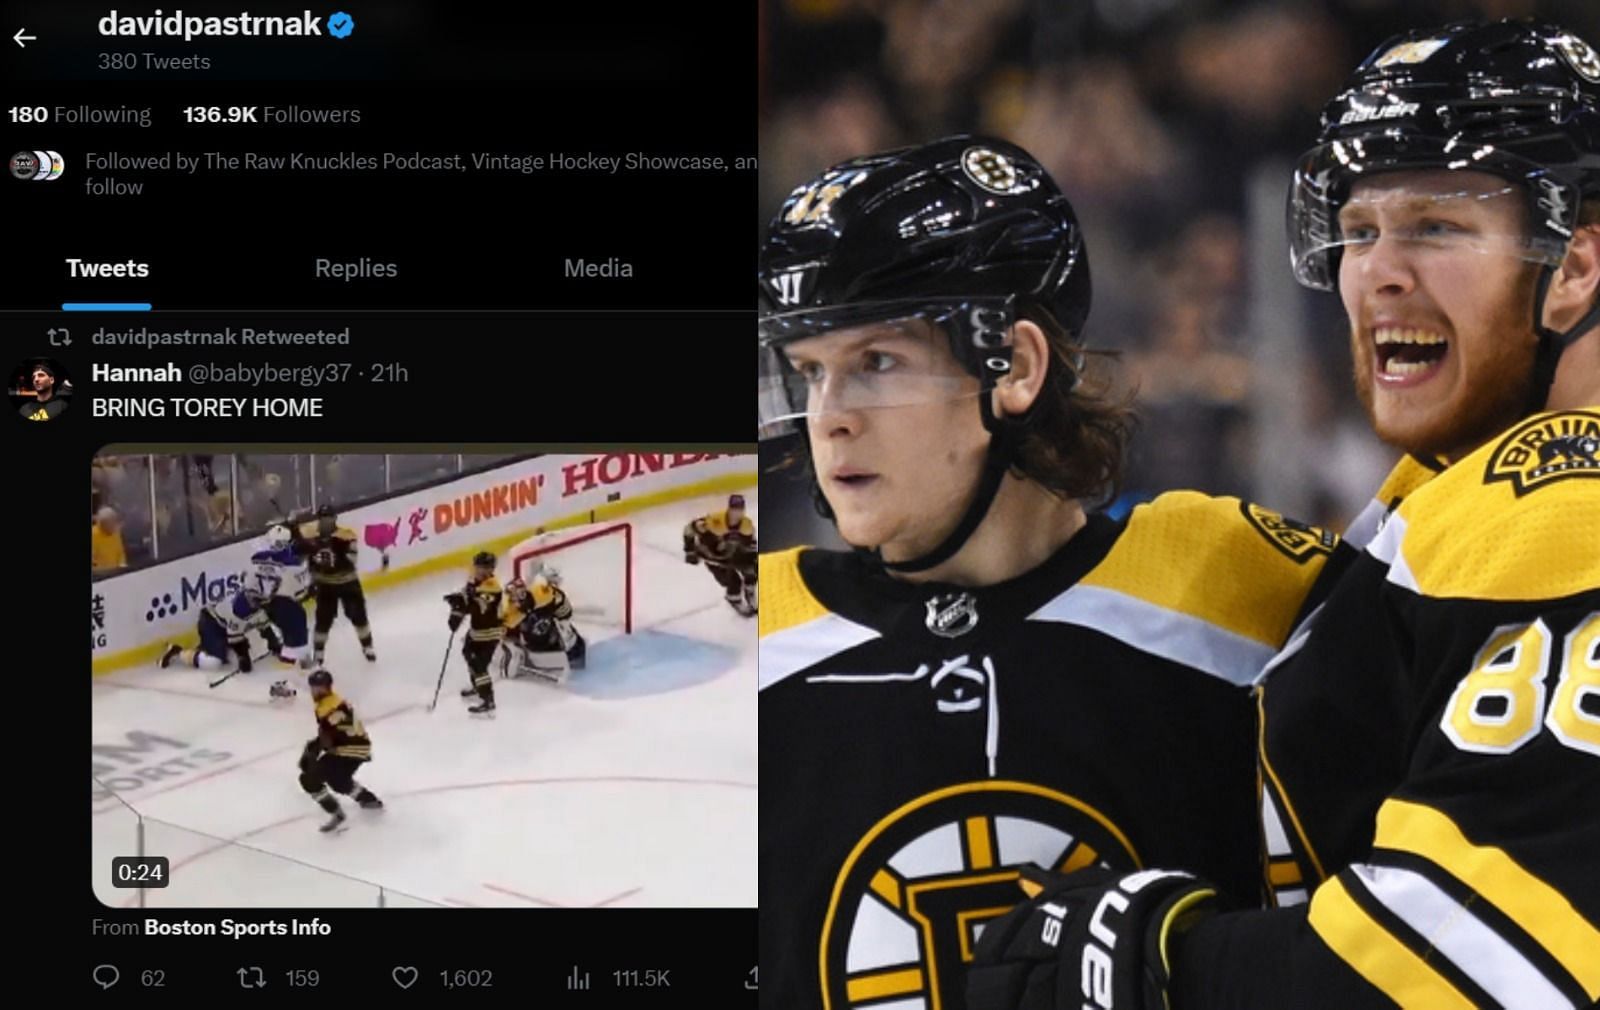 Does David Pastrnak want Torey Krug back in the Boston Bruins lineup?